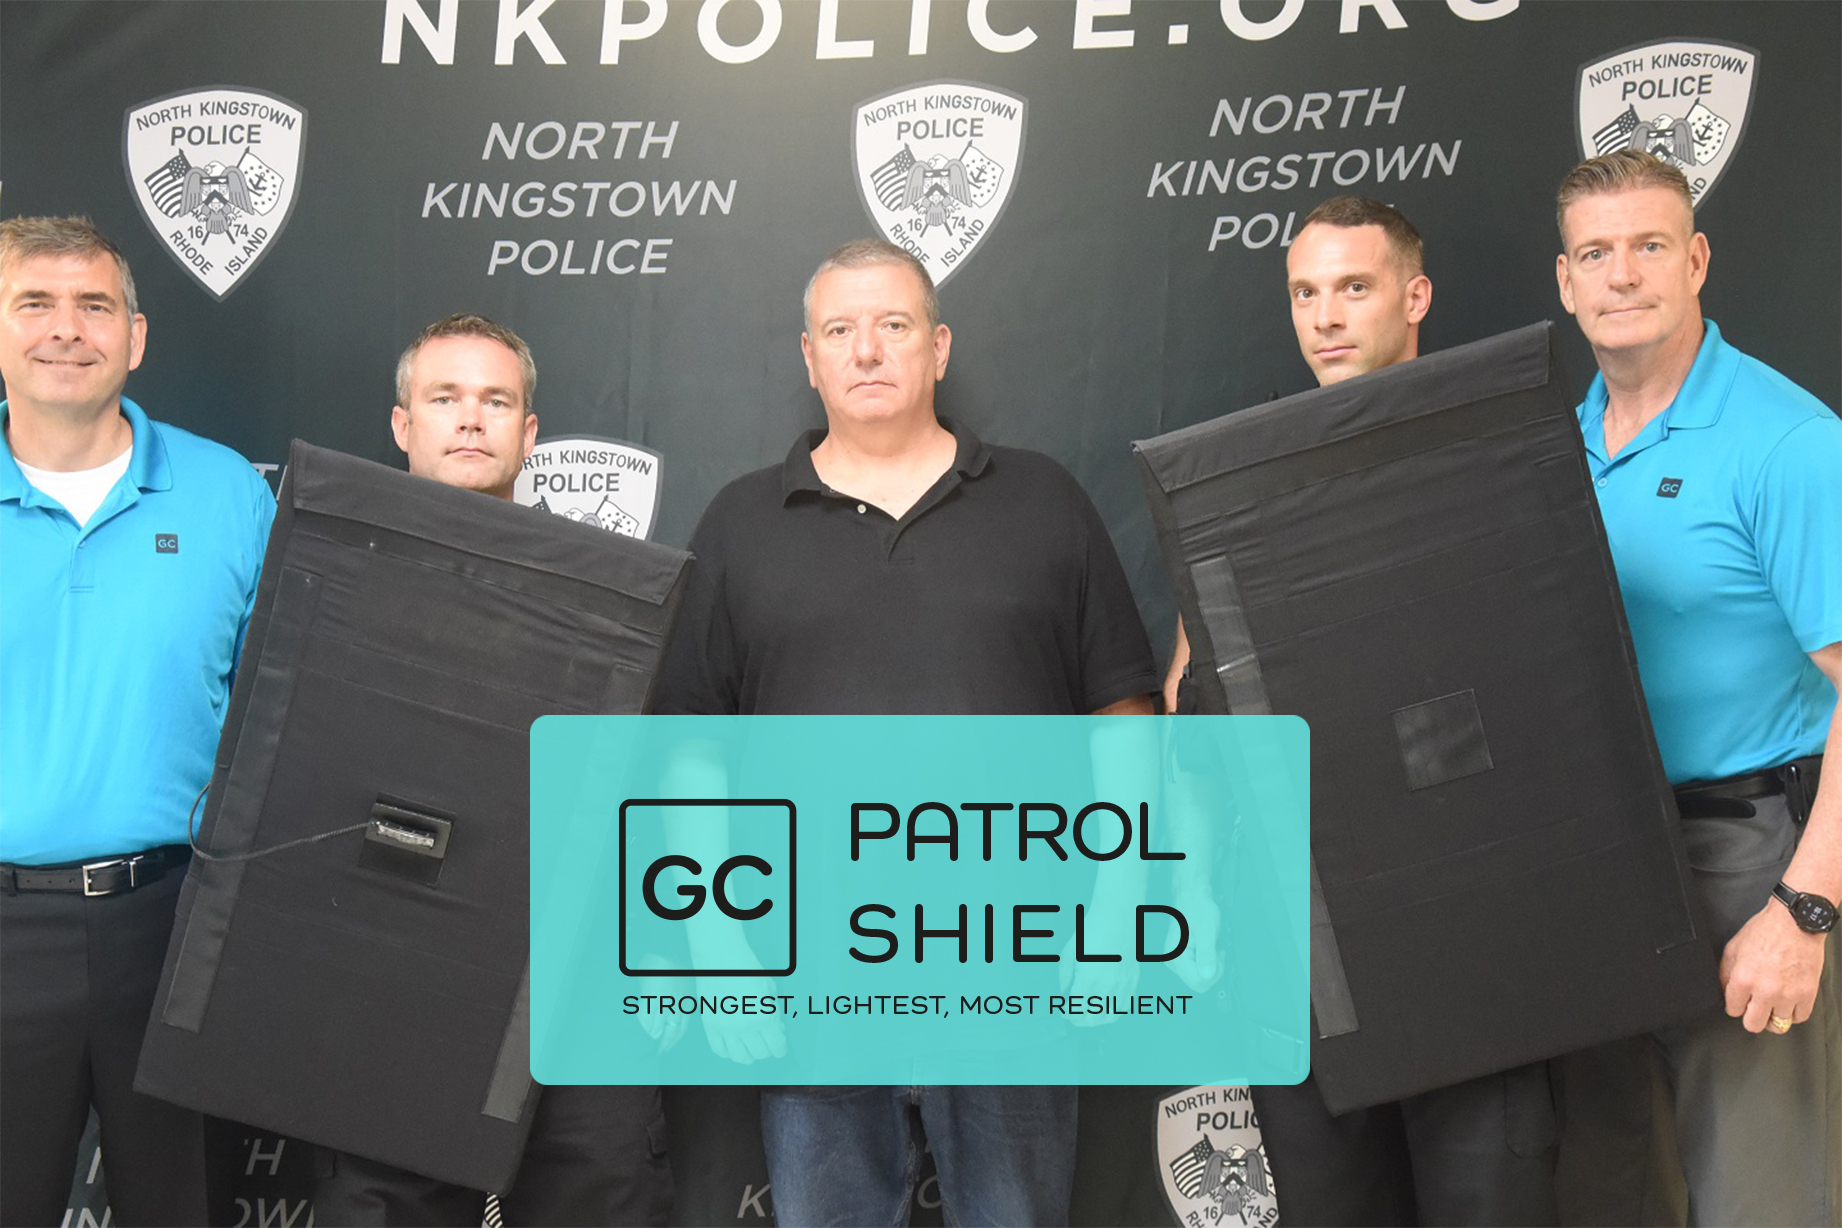 North Kingstown Police purchase GC Patrol Shields